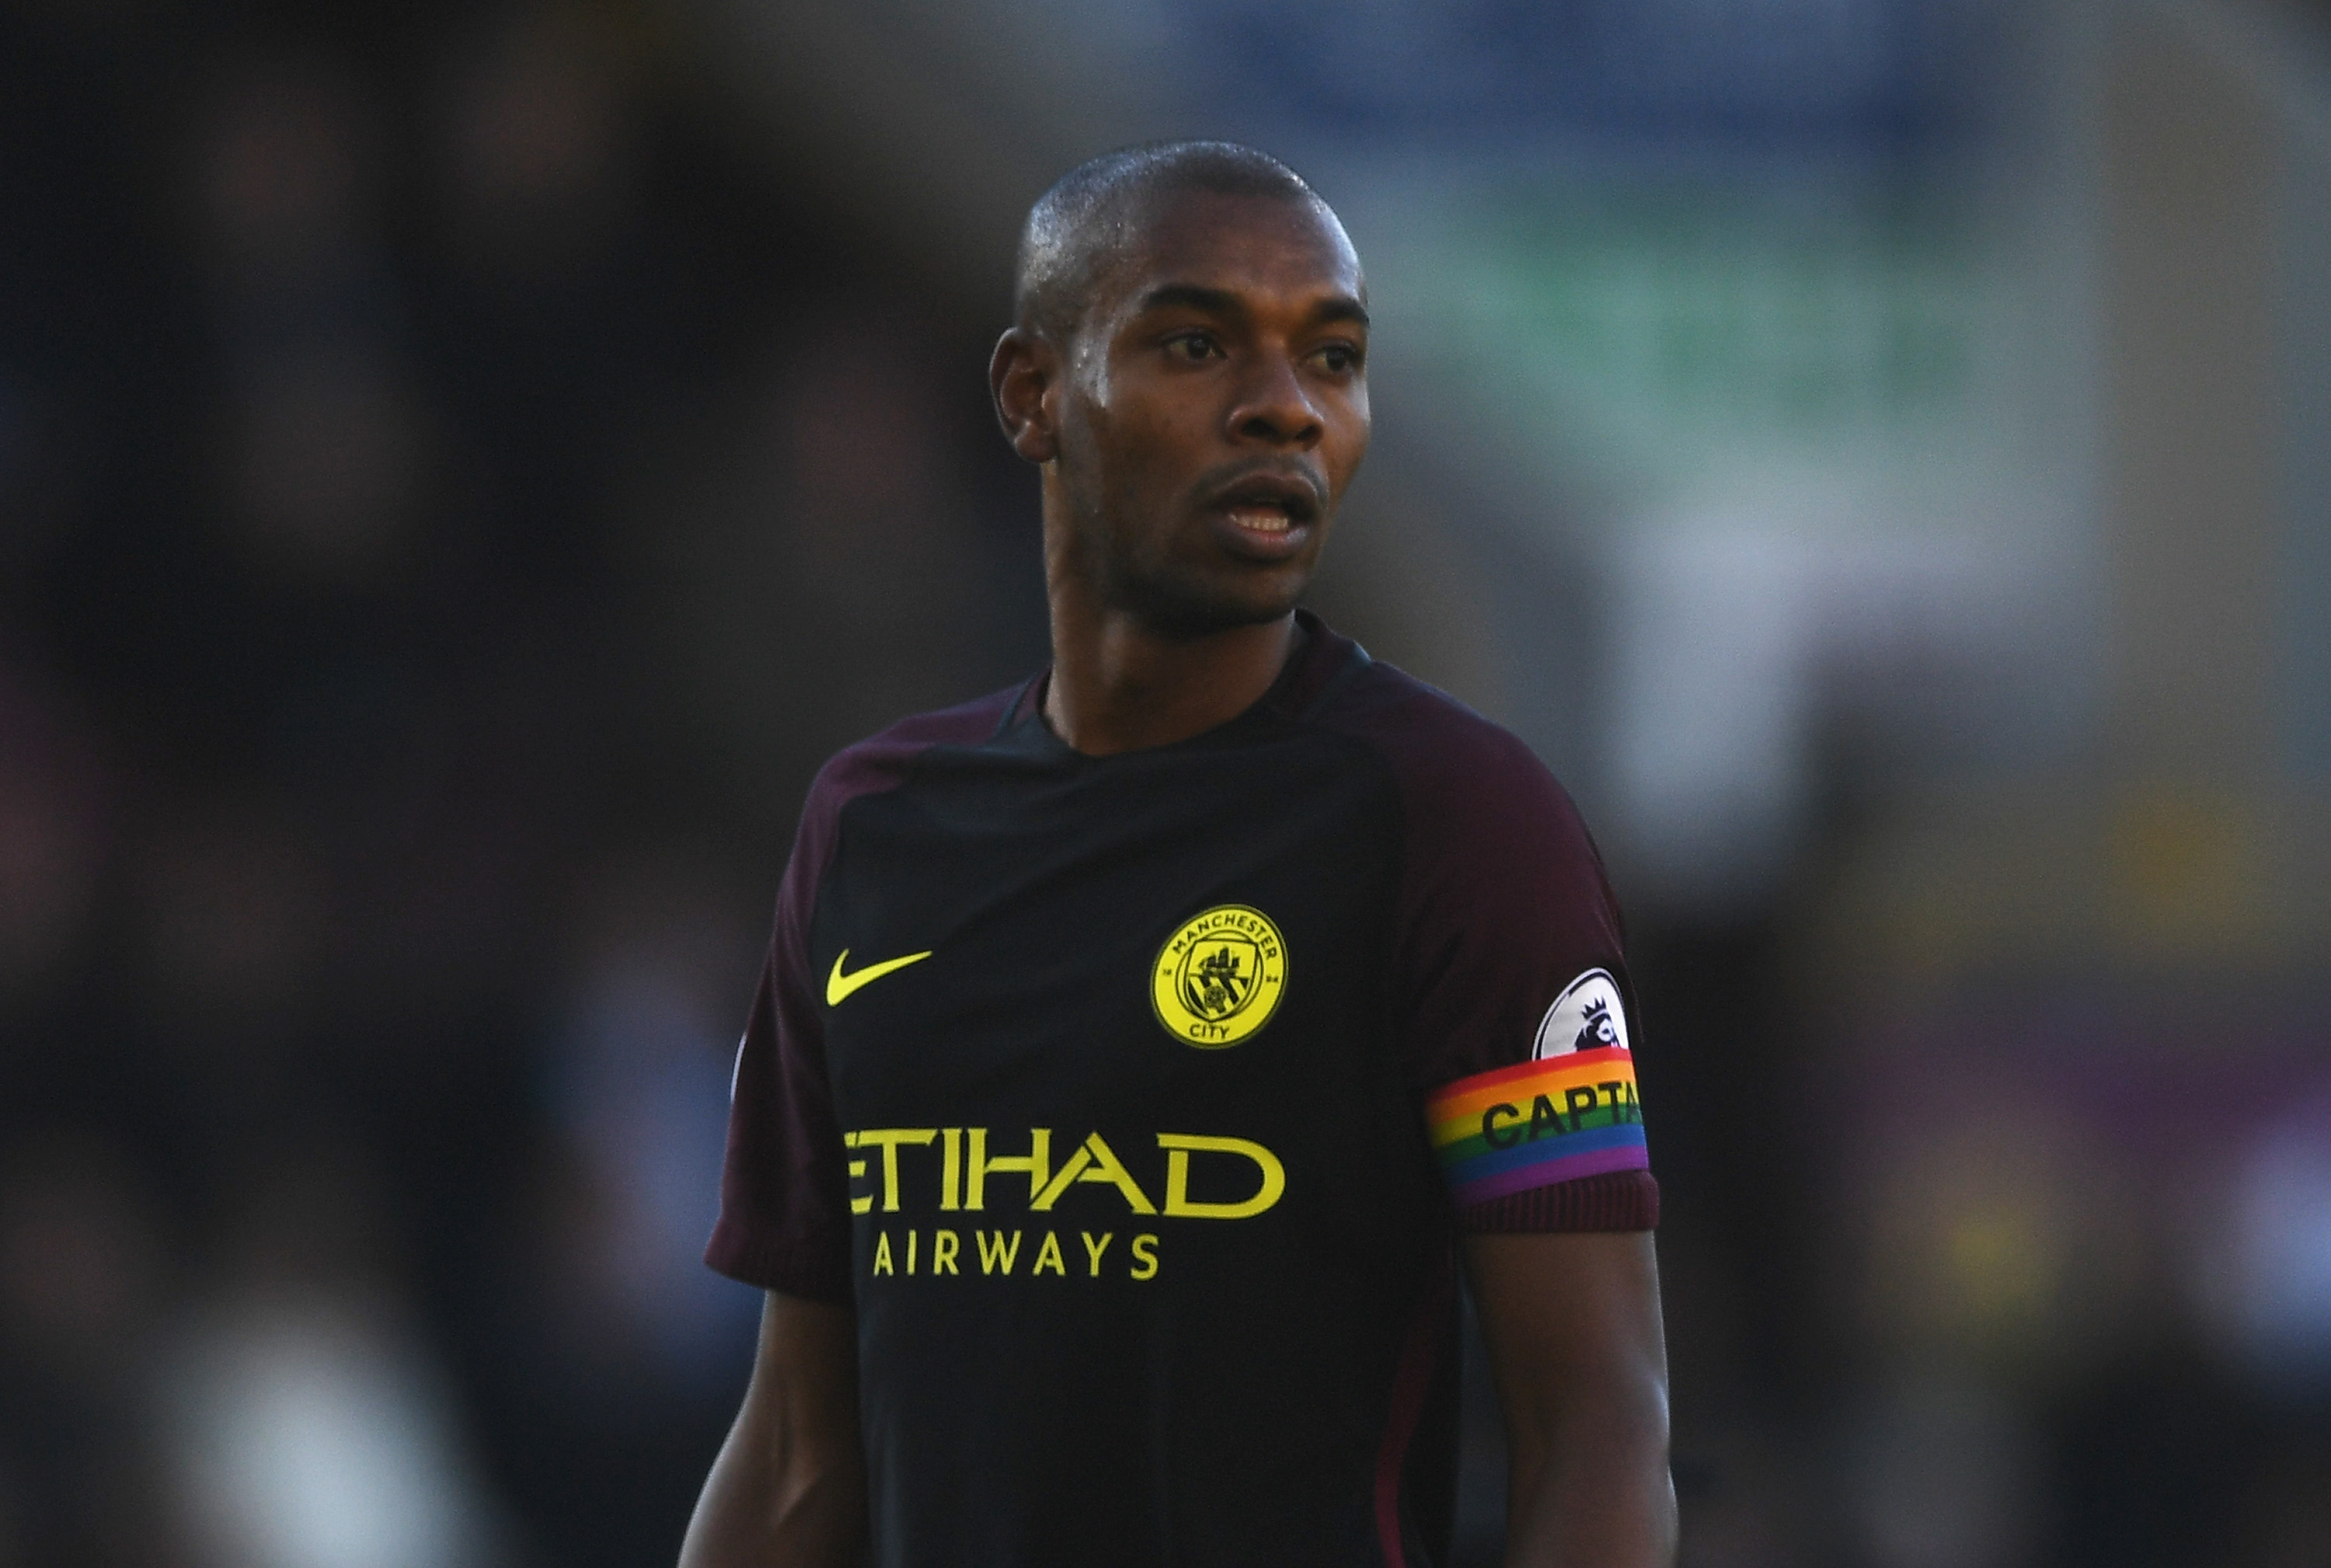 BURNLEY, ENGLAND - NOVEMBER 26:  Fernandinho of Manchester City wearing a rainbow-coloured captain's armband is seen during the Premier League match between Burnley and Manchester City at Turf Moor on November 26, 2016 in Burnley, England.  (Photo by Gareth Copley/Getty Images)